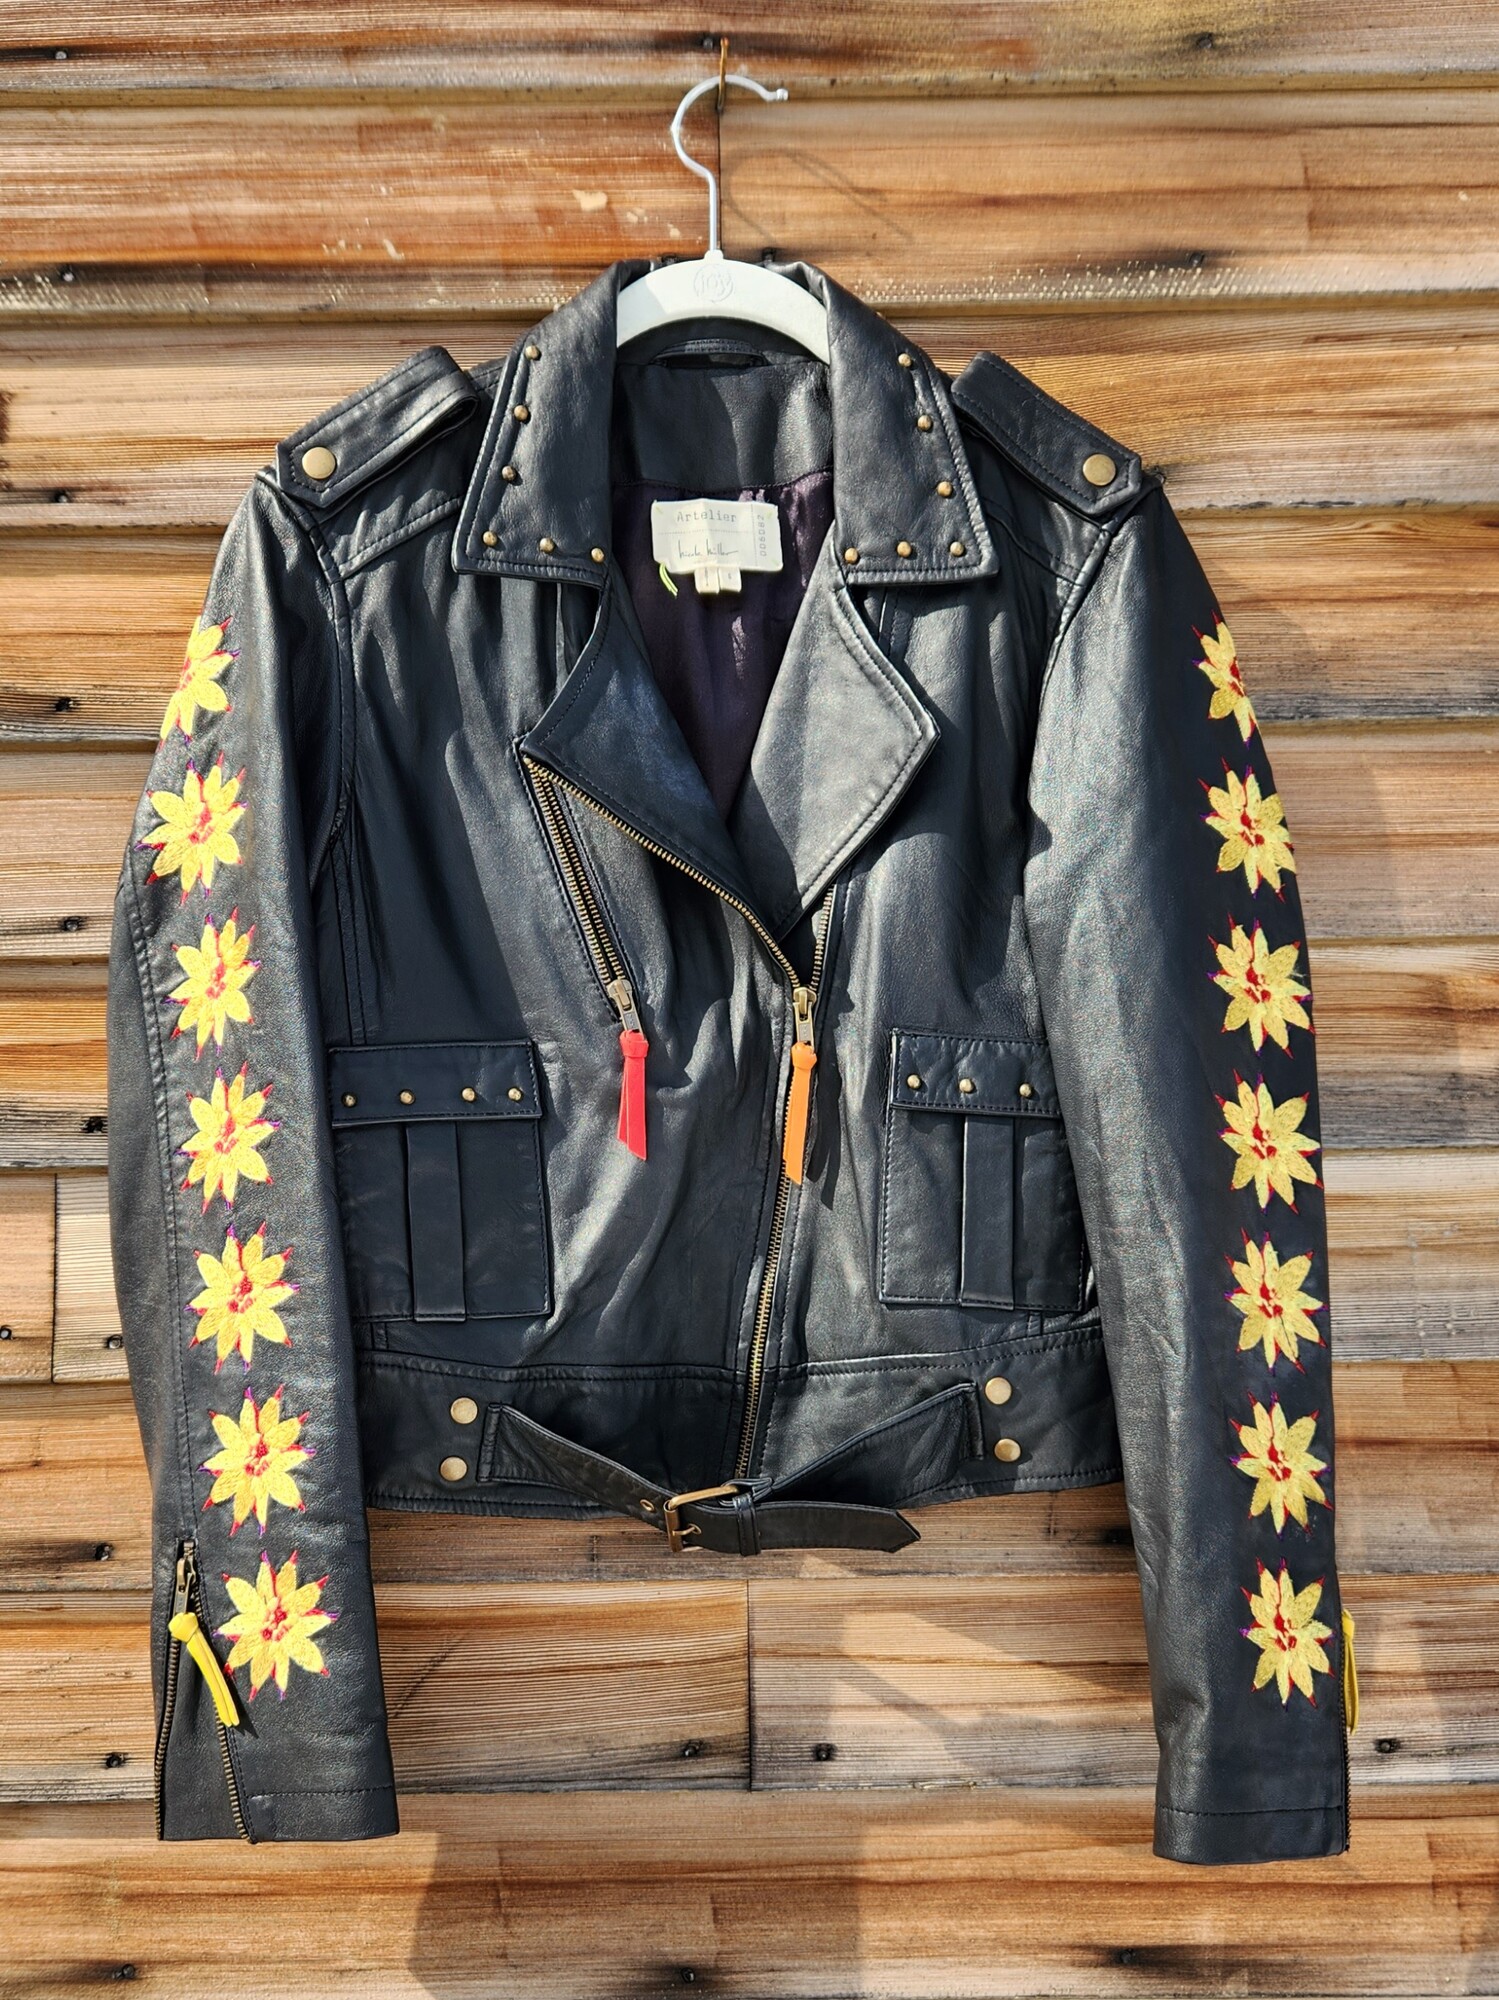 A classic Nicole Miller Artelier Leather Moto Jacket
Black Biker style Jacket Embellished with Flowers and Studs
Zipper Sleeve, two flap pockets - one zipper pocket
Size Small
Pit to Pit 19.5 inches
Pit down sleeve 19 inches
Waist 17 inches across
Pit down to wait 12 inches
RARE FIND
RETAIL $900
LIKE NEW